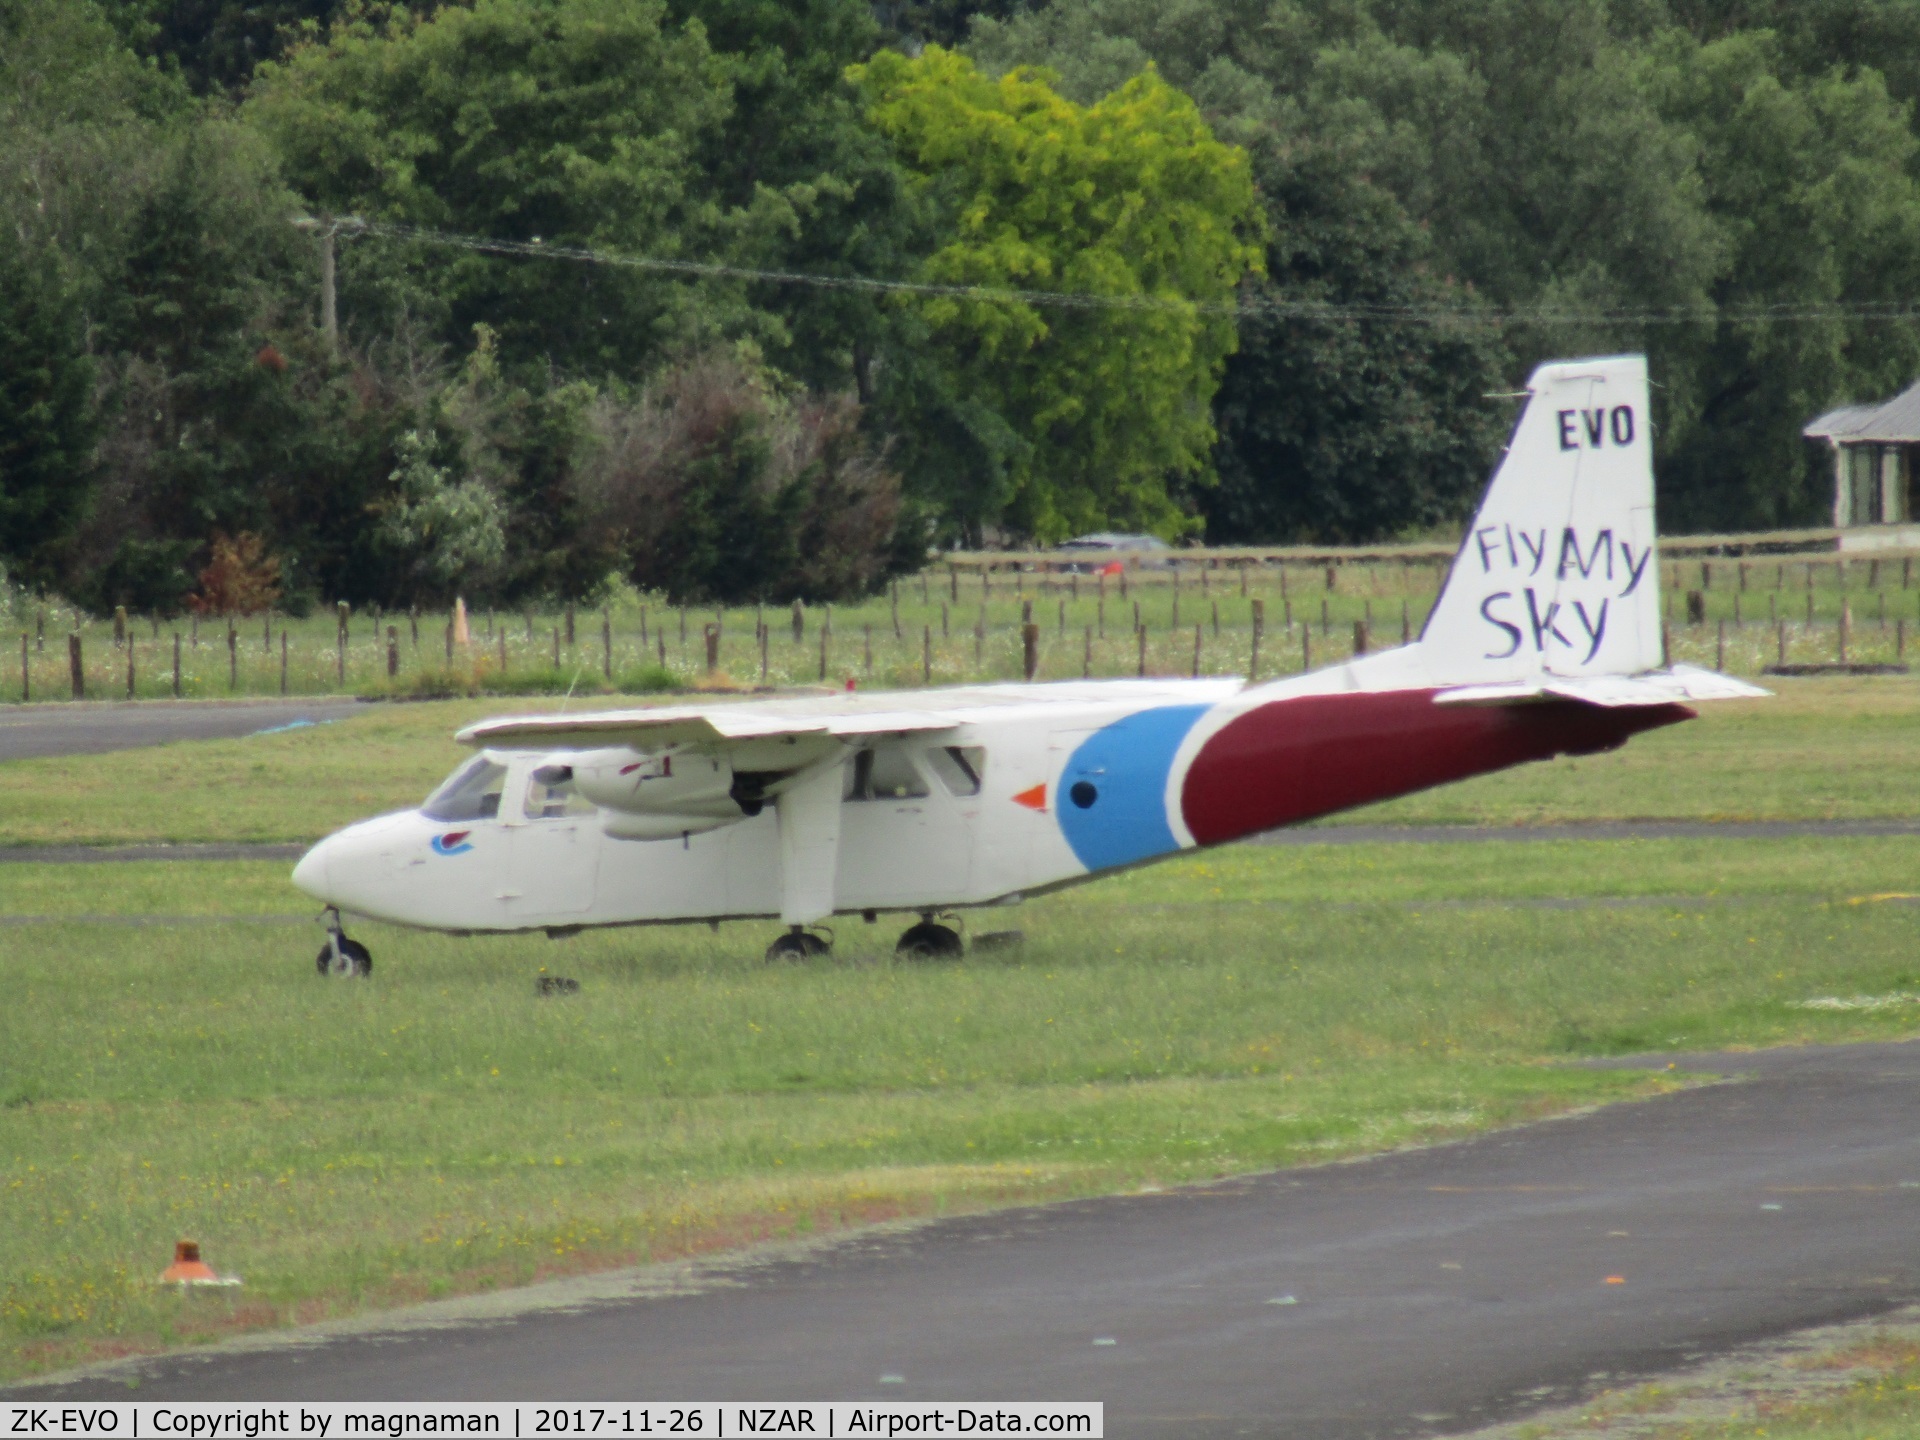 ZK-EVO, 1976 Britten-Norman BN-2A-26 Islander C/N 785, left about 5 mins after i took this piccy